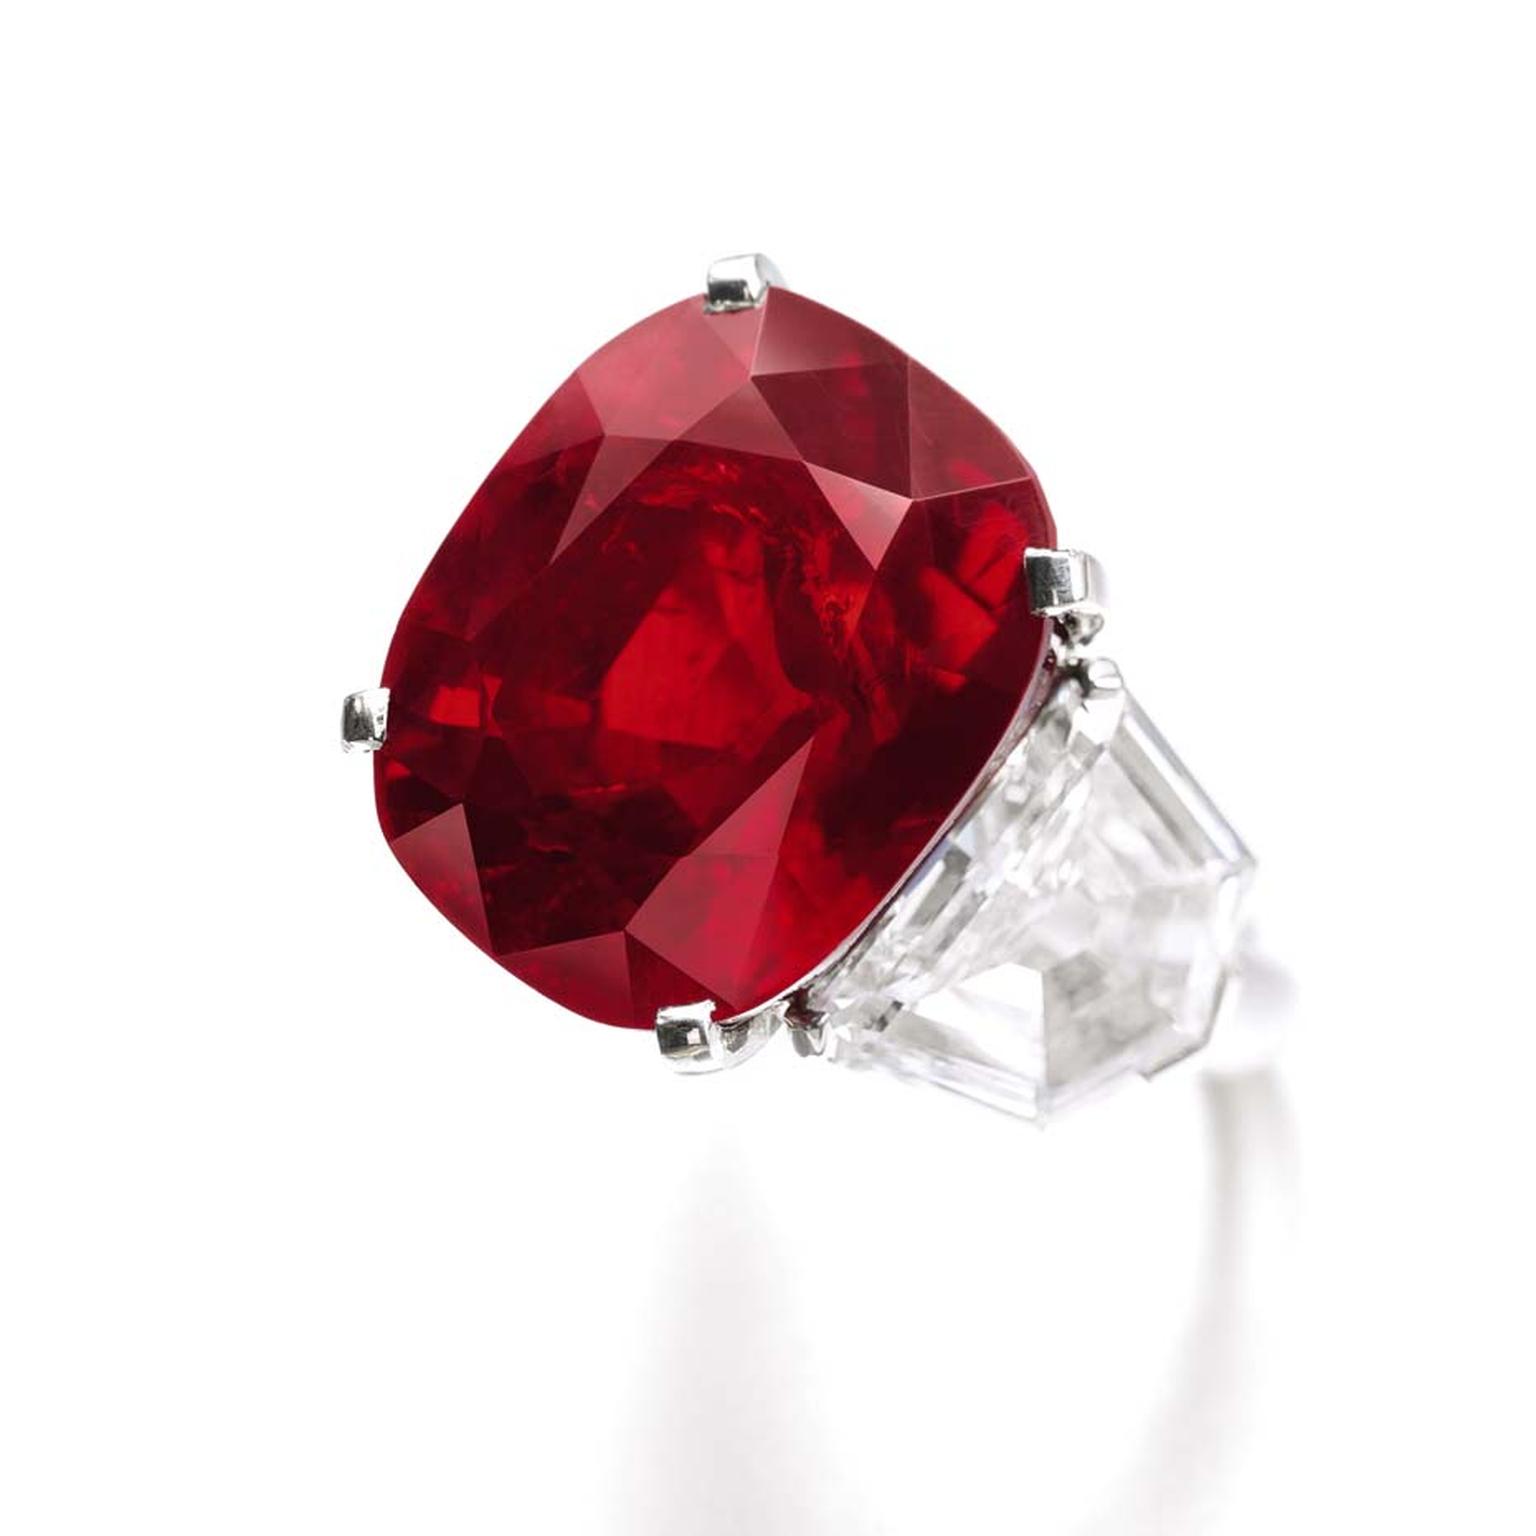 Named after a poem written by the Sufi poet Rumi, The Sunrise Ruby, an extraordinary cushion-shaped 25.59ct Burmese ruby, was mounted as a ring by Cartier. With a pre-sale estimate of US$12-18 million, the 25.59ct cushion-cut ruby should easily surpass th